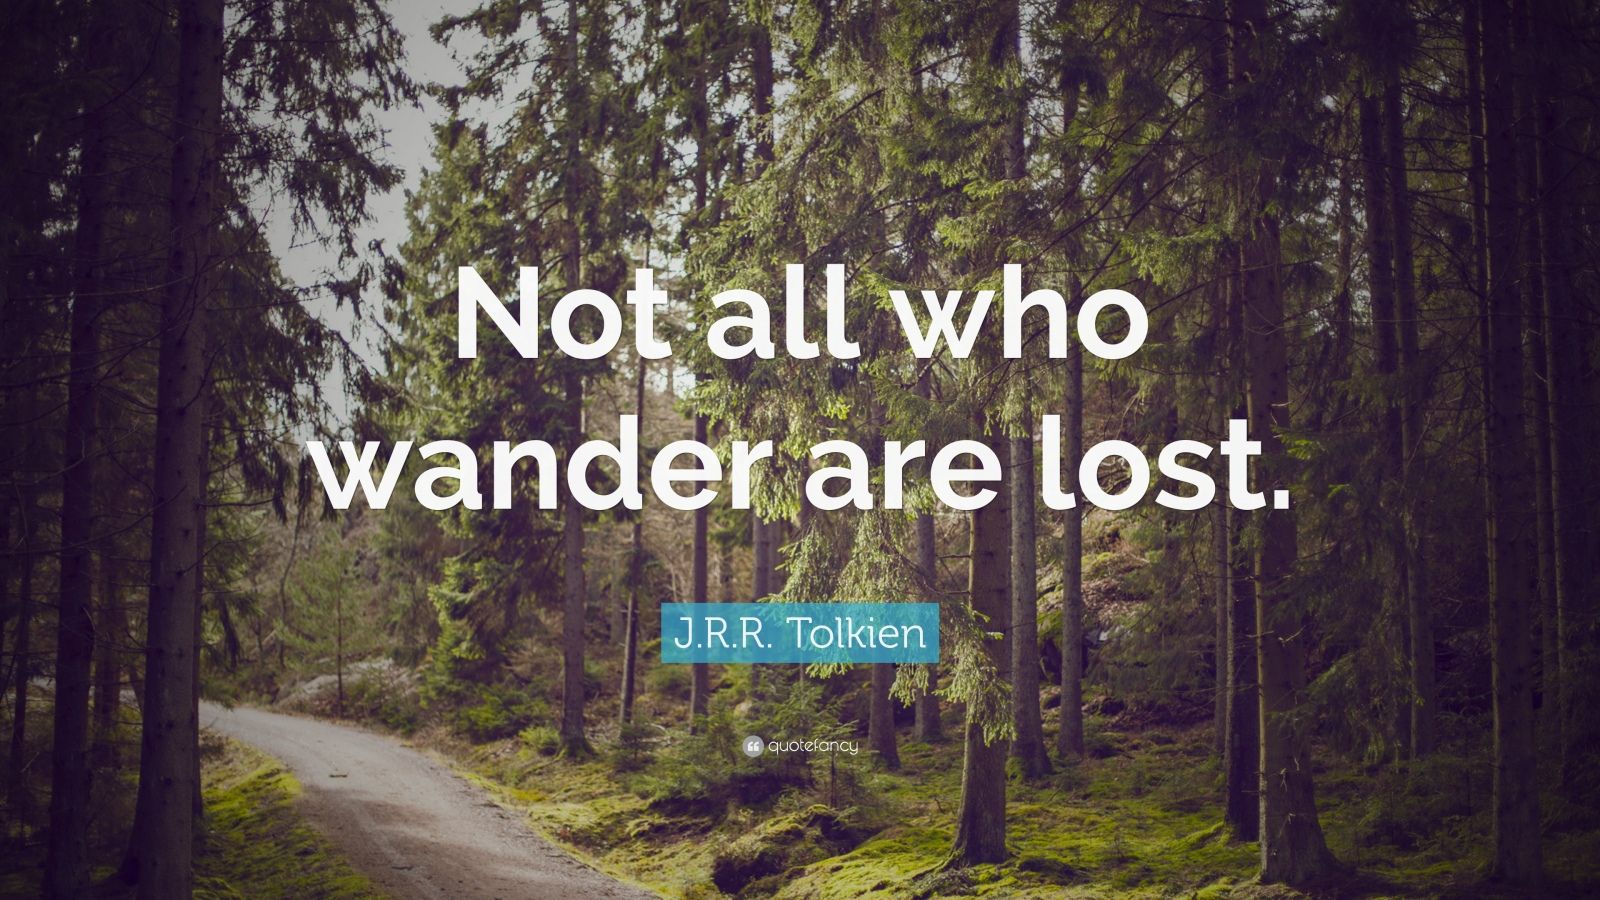 J. R. R. Tolkien Quote: “Not all who wander are lost.” (21 wallpapers ...